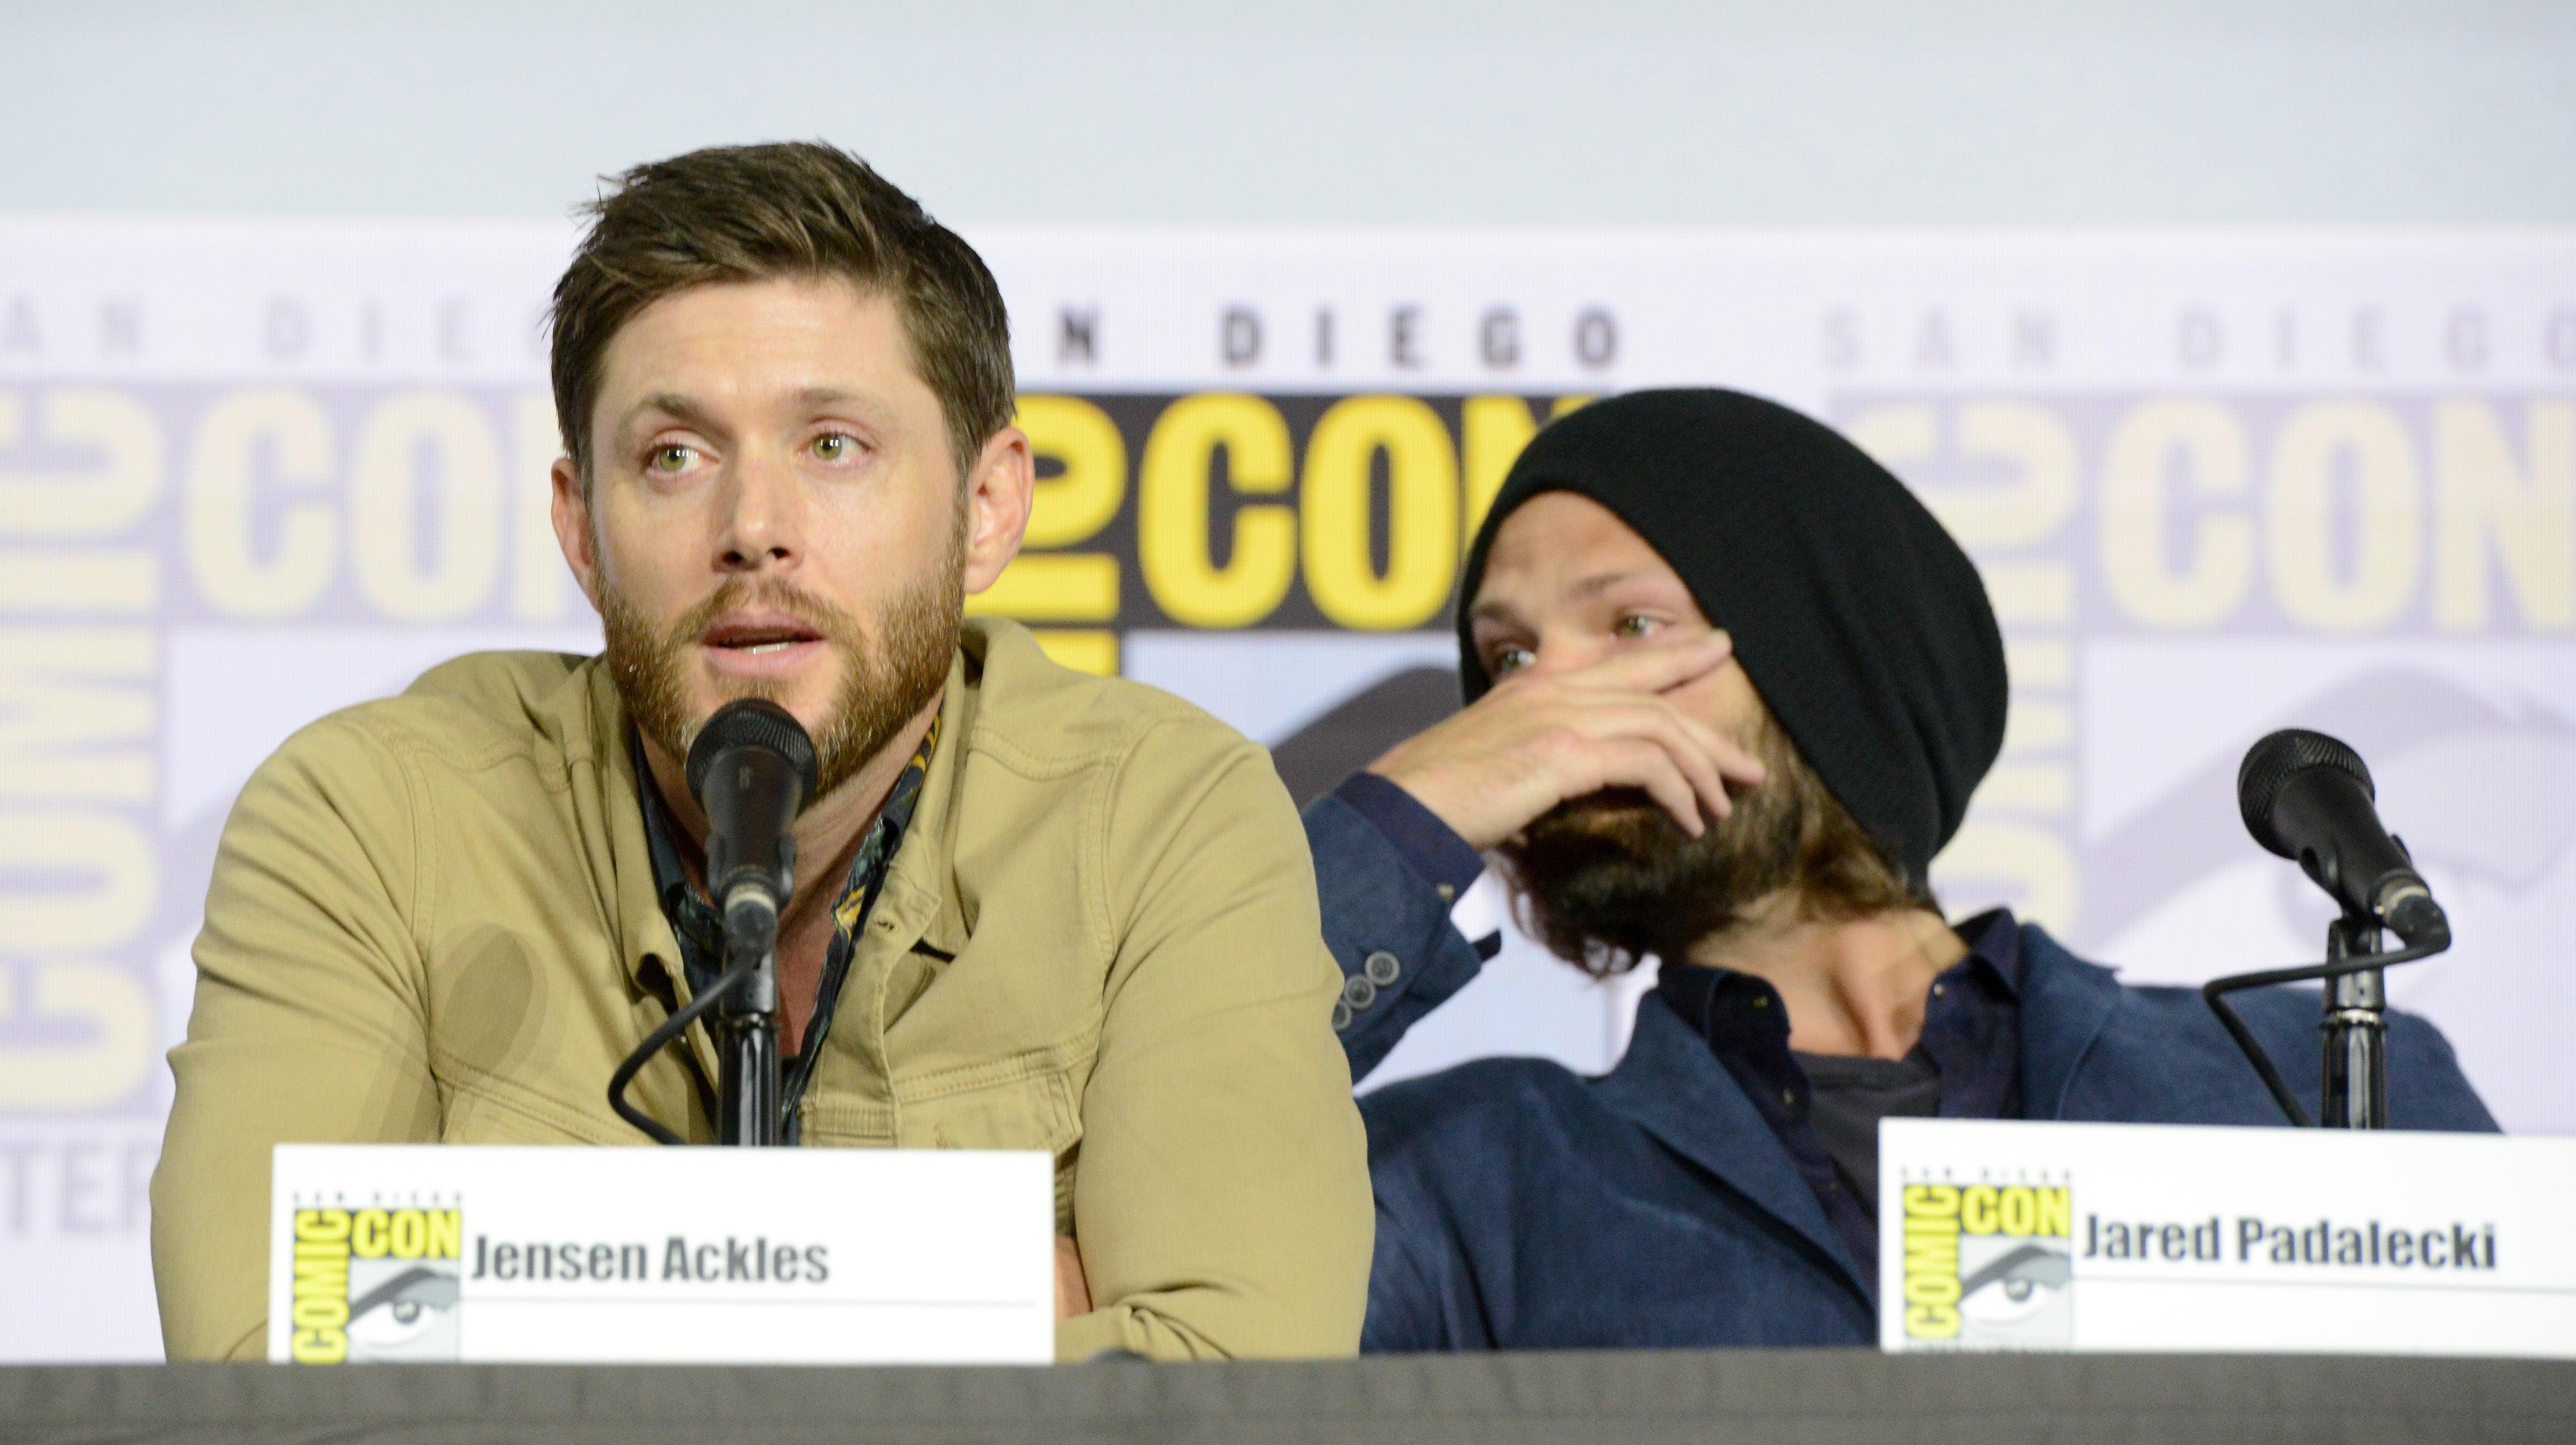 UPDATE: Jared Padalecki says he's "gutted" to learn about Jensen Ackles' Supernatural prequel